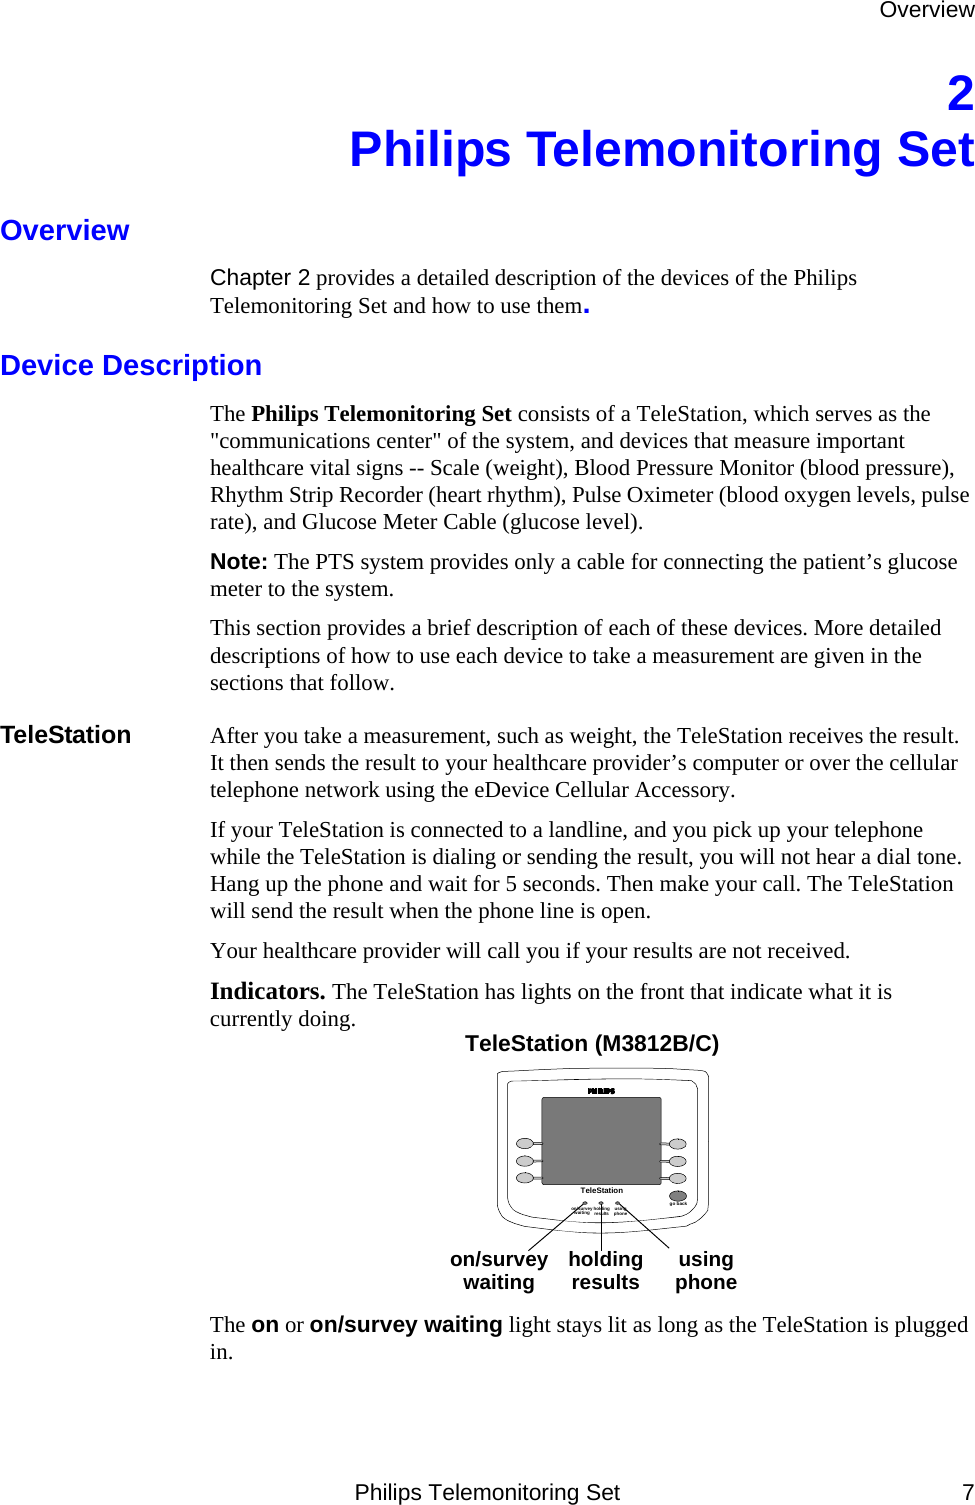 OverviewPhilips Telemonitoring Set 72 Philips Telemonitoring SetOverviewChapter 2 provides a detailed description of the devices of the Philips Telemonitoring Set and how to use them.Device DescriptionThe Philips Telemonitoring Set consists of a TeleStation, which serves as the &quot;communications center&quot; of the system, and devices that measure important healthcare vital signs -- Scale (weight), Blood Pressure Monitor (blood pressure), Rhythm Strip Recorder (heart rhythm), Pulse Oximeter (blood oxygen levels, pulse rate), and Glucose Meter Cable (glucose level). Note: The PTS system provides only a cable for connecting the patient’s glucose meter to the system.This section provides a brief description of each of these devices. More detailed descriptions of how to use each device to take a measurement are given in the sections that follow. TeleStation After you take a measurement, such as weight, the TeleStation receives the result. It then sends the result to your healthcare provider’s computer or over the cellular telephone network using the eDevice Cellular Accessory.If your TeleStation is connected to a landline, and you pick up your telephone while the TeleStation is dialing or sending the result, you will not hear a dial tone. Hang up the phone and wait for 5 seconds. Then make your call. The TeleStation will send the result when the phone line is open. Your healthcare provider will call you if your results are not received.Indicators. The TeleStation has lights on the front that indicate what it is currently doing. The on or on/survey waiting light stays lit as long as the TeleStation is plugged in. TeleStationgo backTeleStation (M3812B/C)on/survey waiting holding results using  phoneon/survey waiting holding results using phone